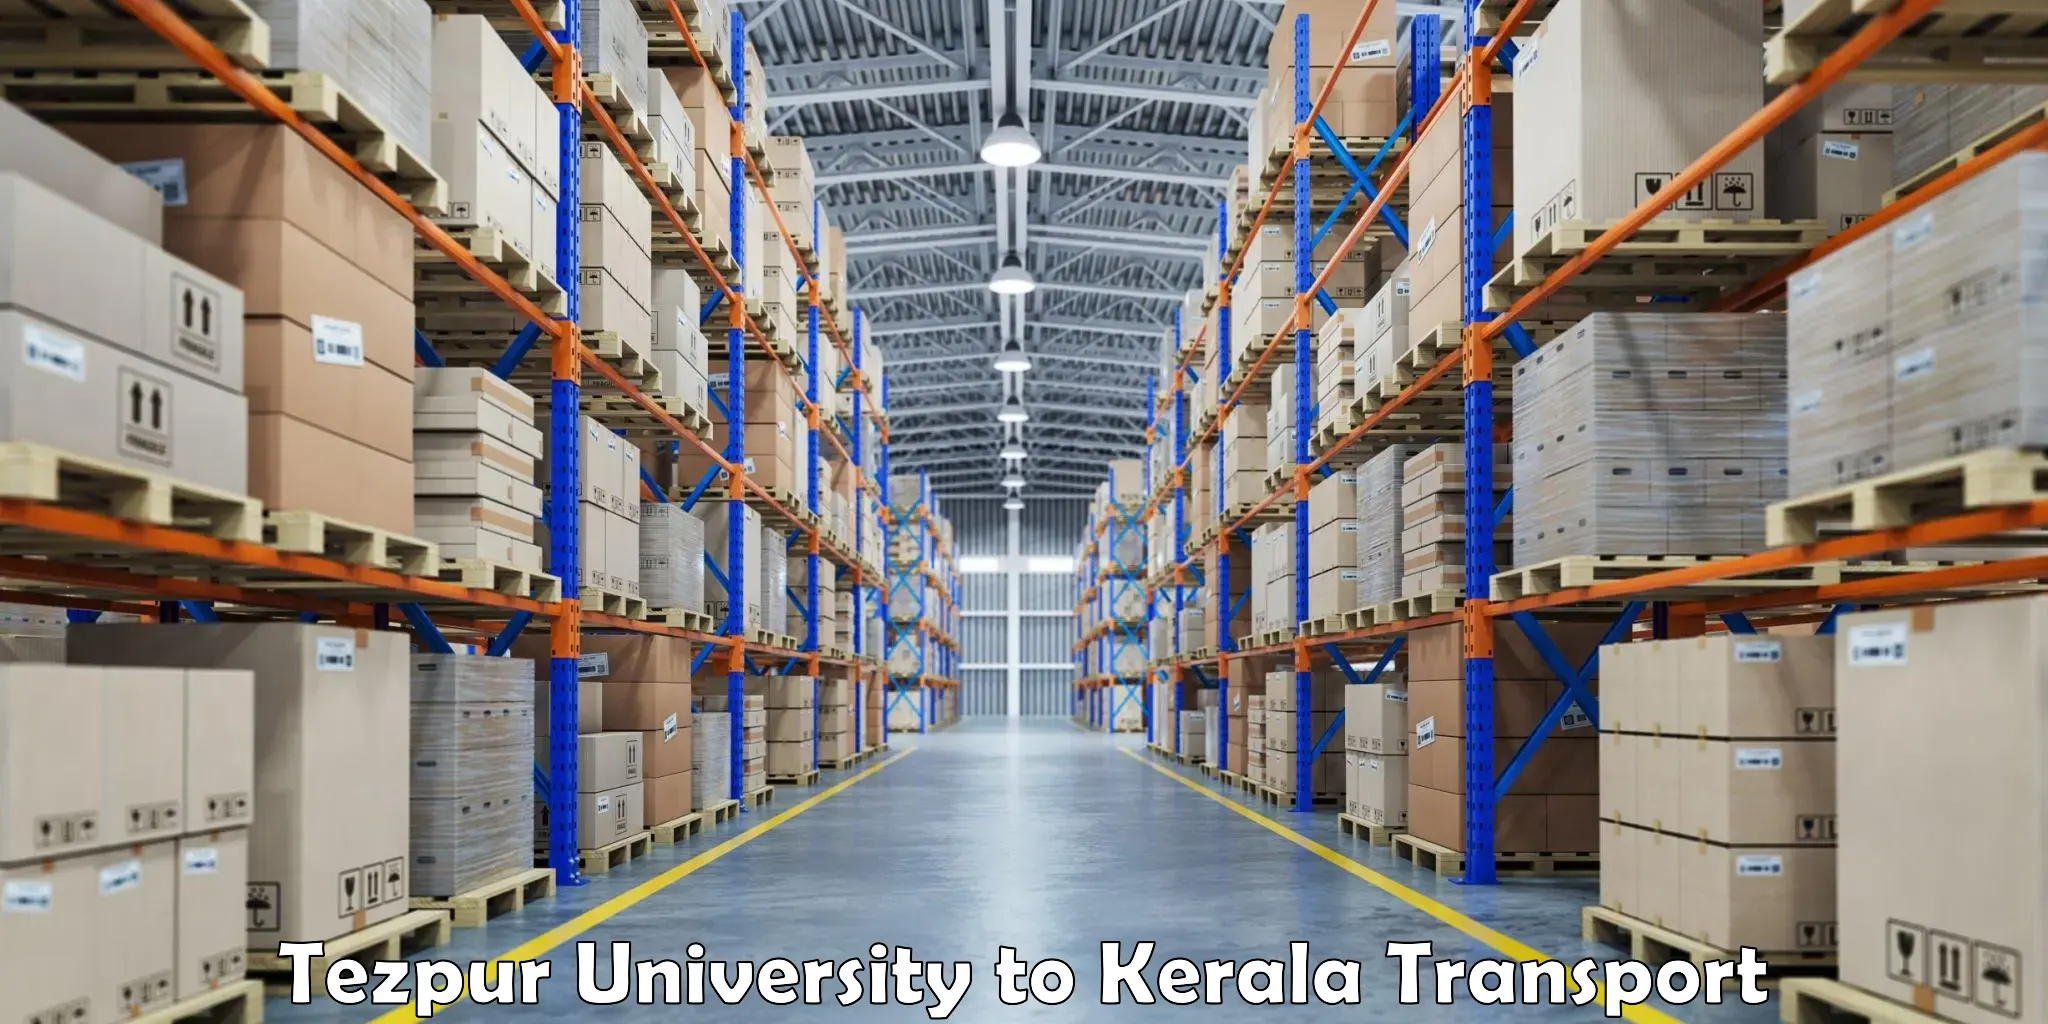 Air cargo transport services Tezpur University to Cochin University of Science and Technology